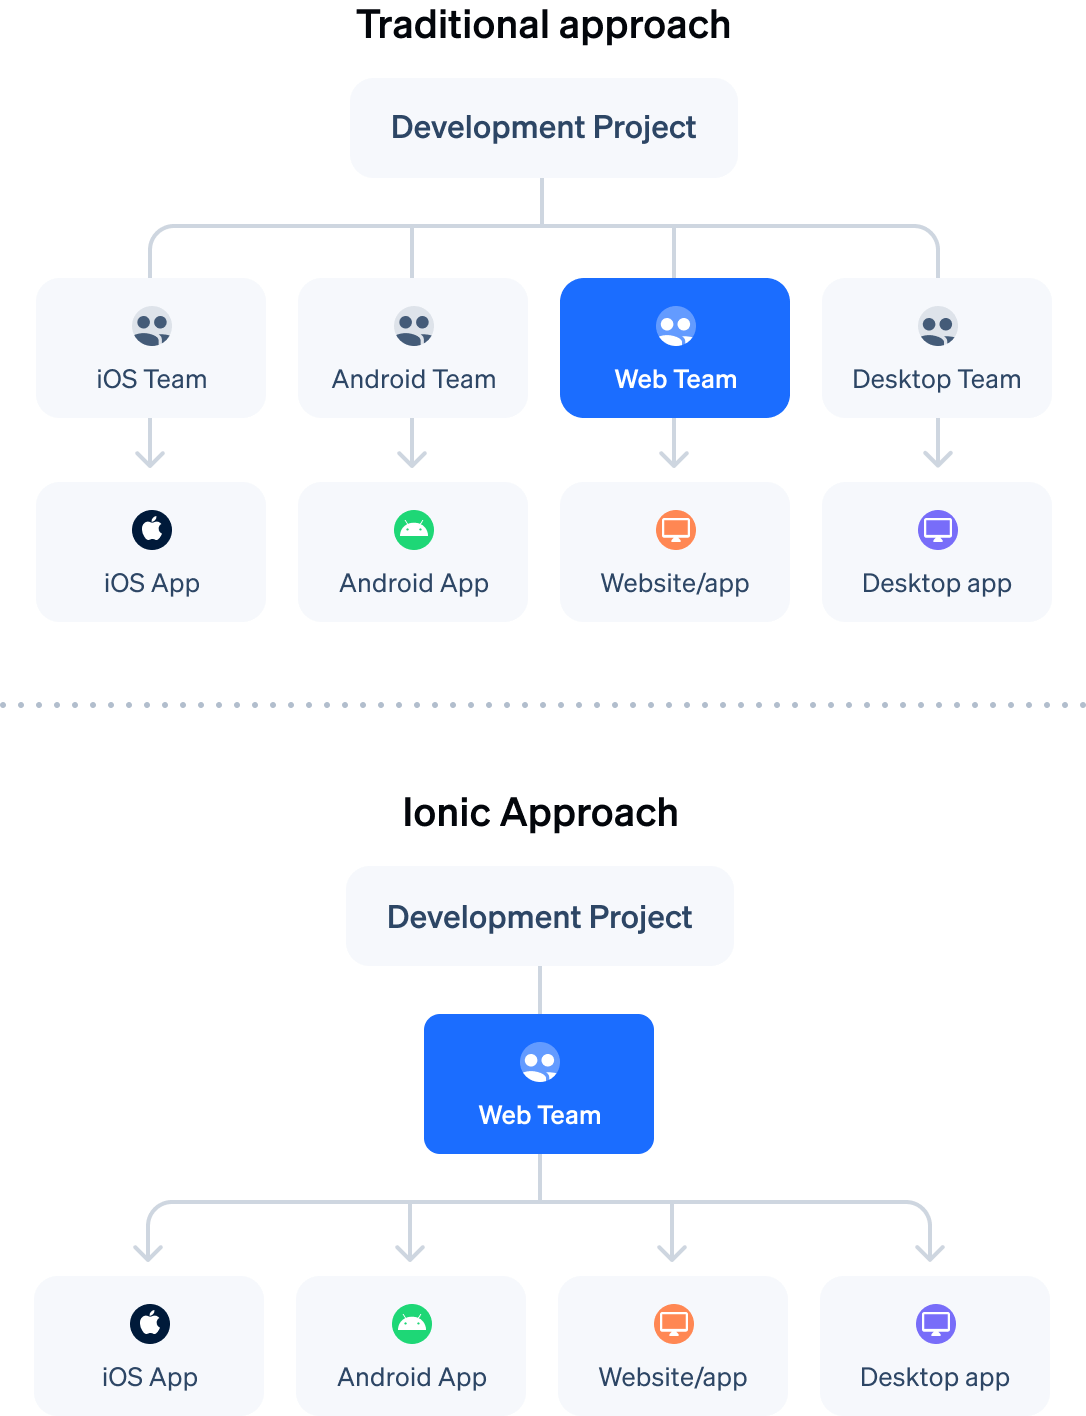 Traditional approach to development flow chart